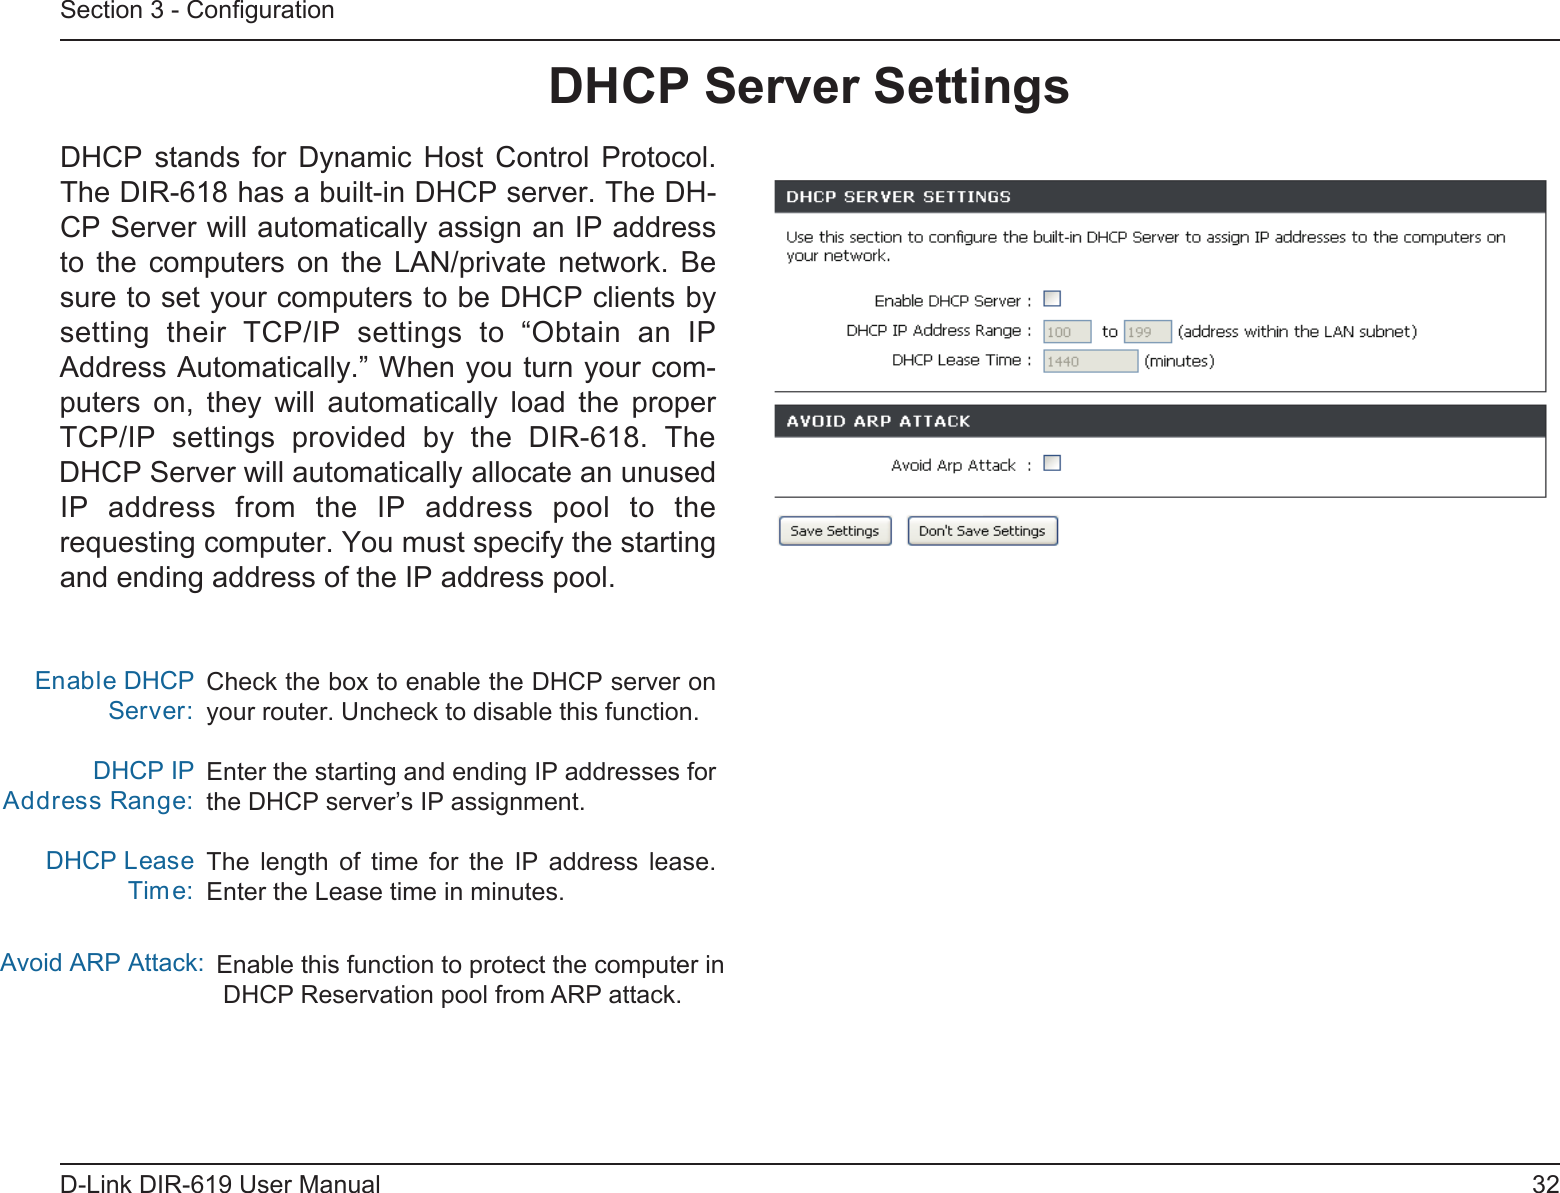 32D-Link DIR-619 User ManualSection 3 - ConﬁgurationCheck the box to enable the DHCP server on your router. Uncheck to disable this function.Enter the starting and ending IP addresses forthe DHCP server’s IP assignment.The  length  of  time  for  the  IP  address  lease.Enter the Lease time in minutes.Enable DHCP Server:DHCP IPAddress Range:DHCP Lease TimAvoid ARP Attack:e:DHCP Server SettingsDHCP  stands  for  Dynamic  Host  Control  Protocol.The DIR-618 has a built-in DHCP server. The DH-CP Server will automatically assign an IP addressto  the  computers  on  the  LAN/private  network.  Besure to set your computers to be DHCP clients bysetting  their  TCP/IP  settings  to  “Obtain  an  IPAddress Automatically.” When you turn your com-puters  on,  they  will  automatically  load  the  proper TCP/IP  settings  provided  by  the  DIR-618.  TheDHCP Server will automatically allocate an unusedIP  address  from  the  IP  address  pool  to  therequesting computer. You must specify the startingand ending address of the IP address pool.Enable this function to protect the computer in DHCP Reservation pool from ARP attack. 